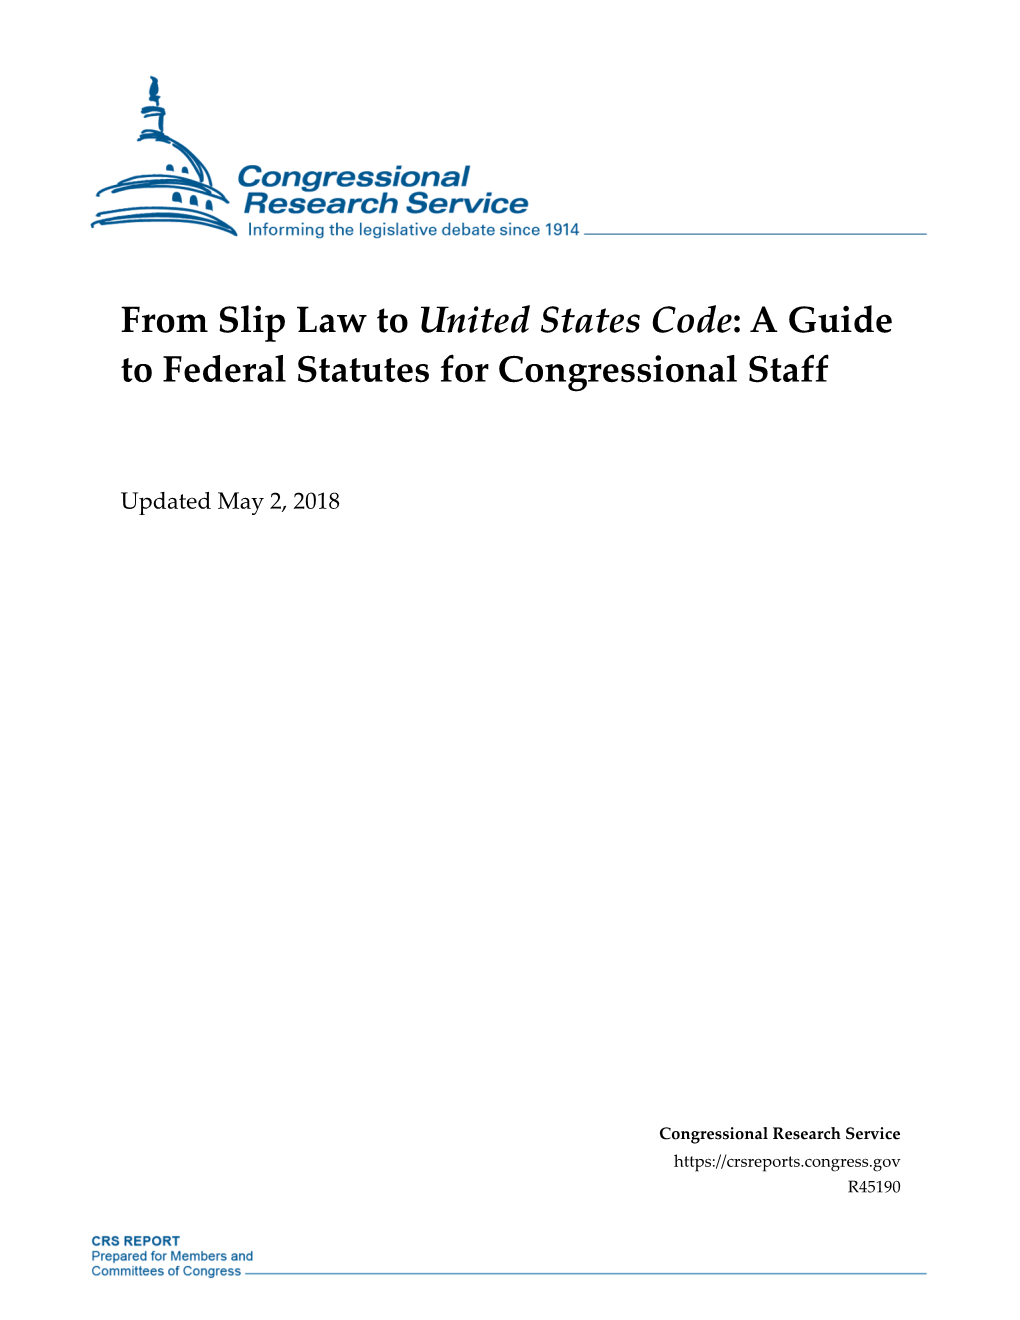 From Slip Law to United States Code: a Guide to Federal Statutes for Congressional Staff